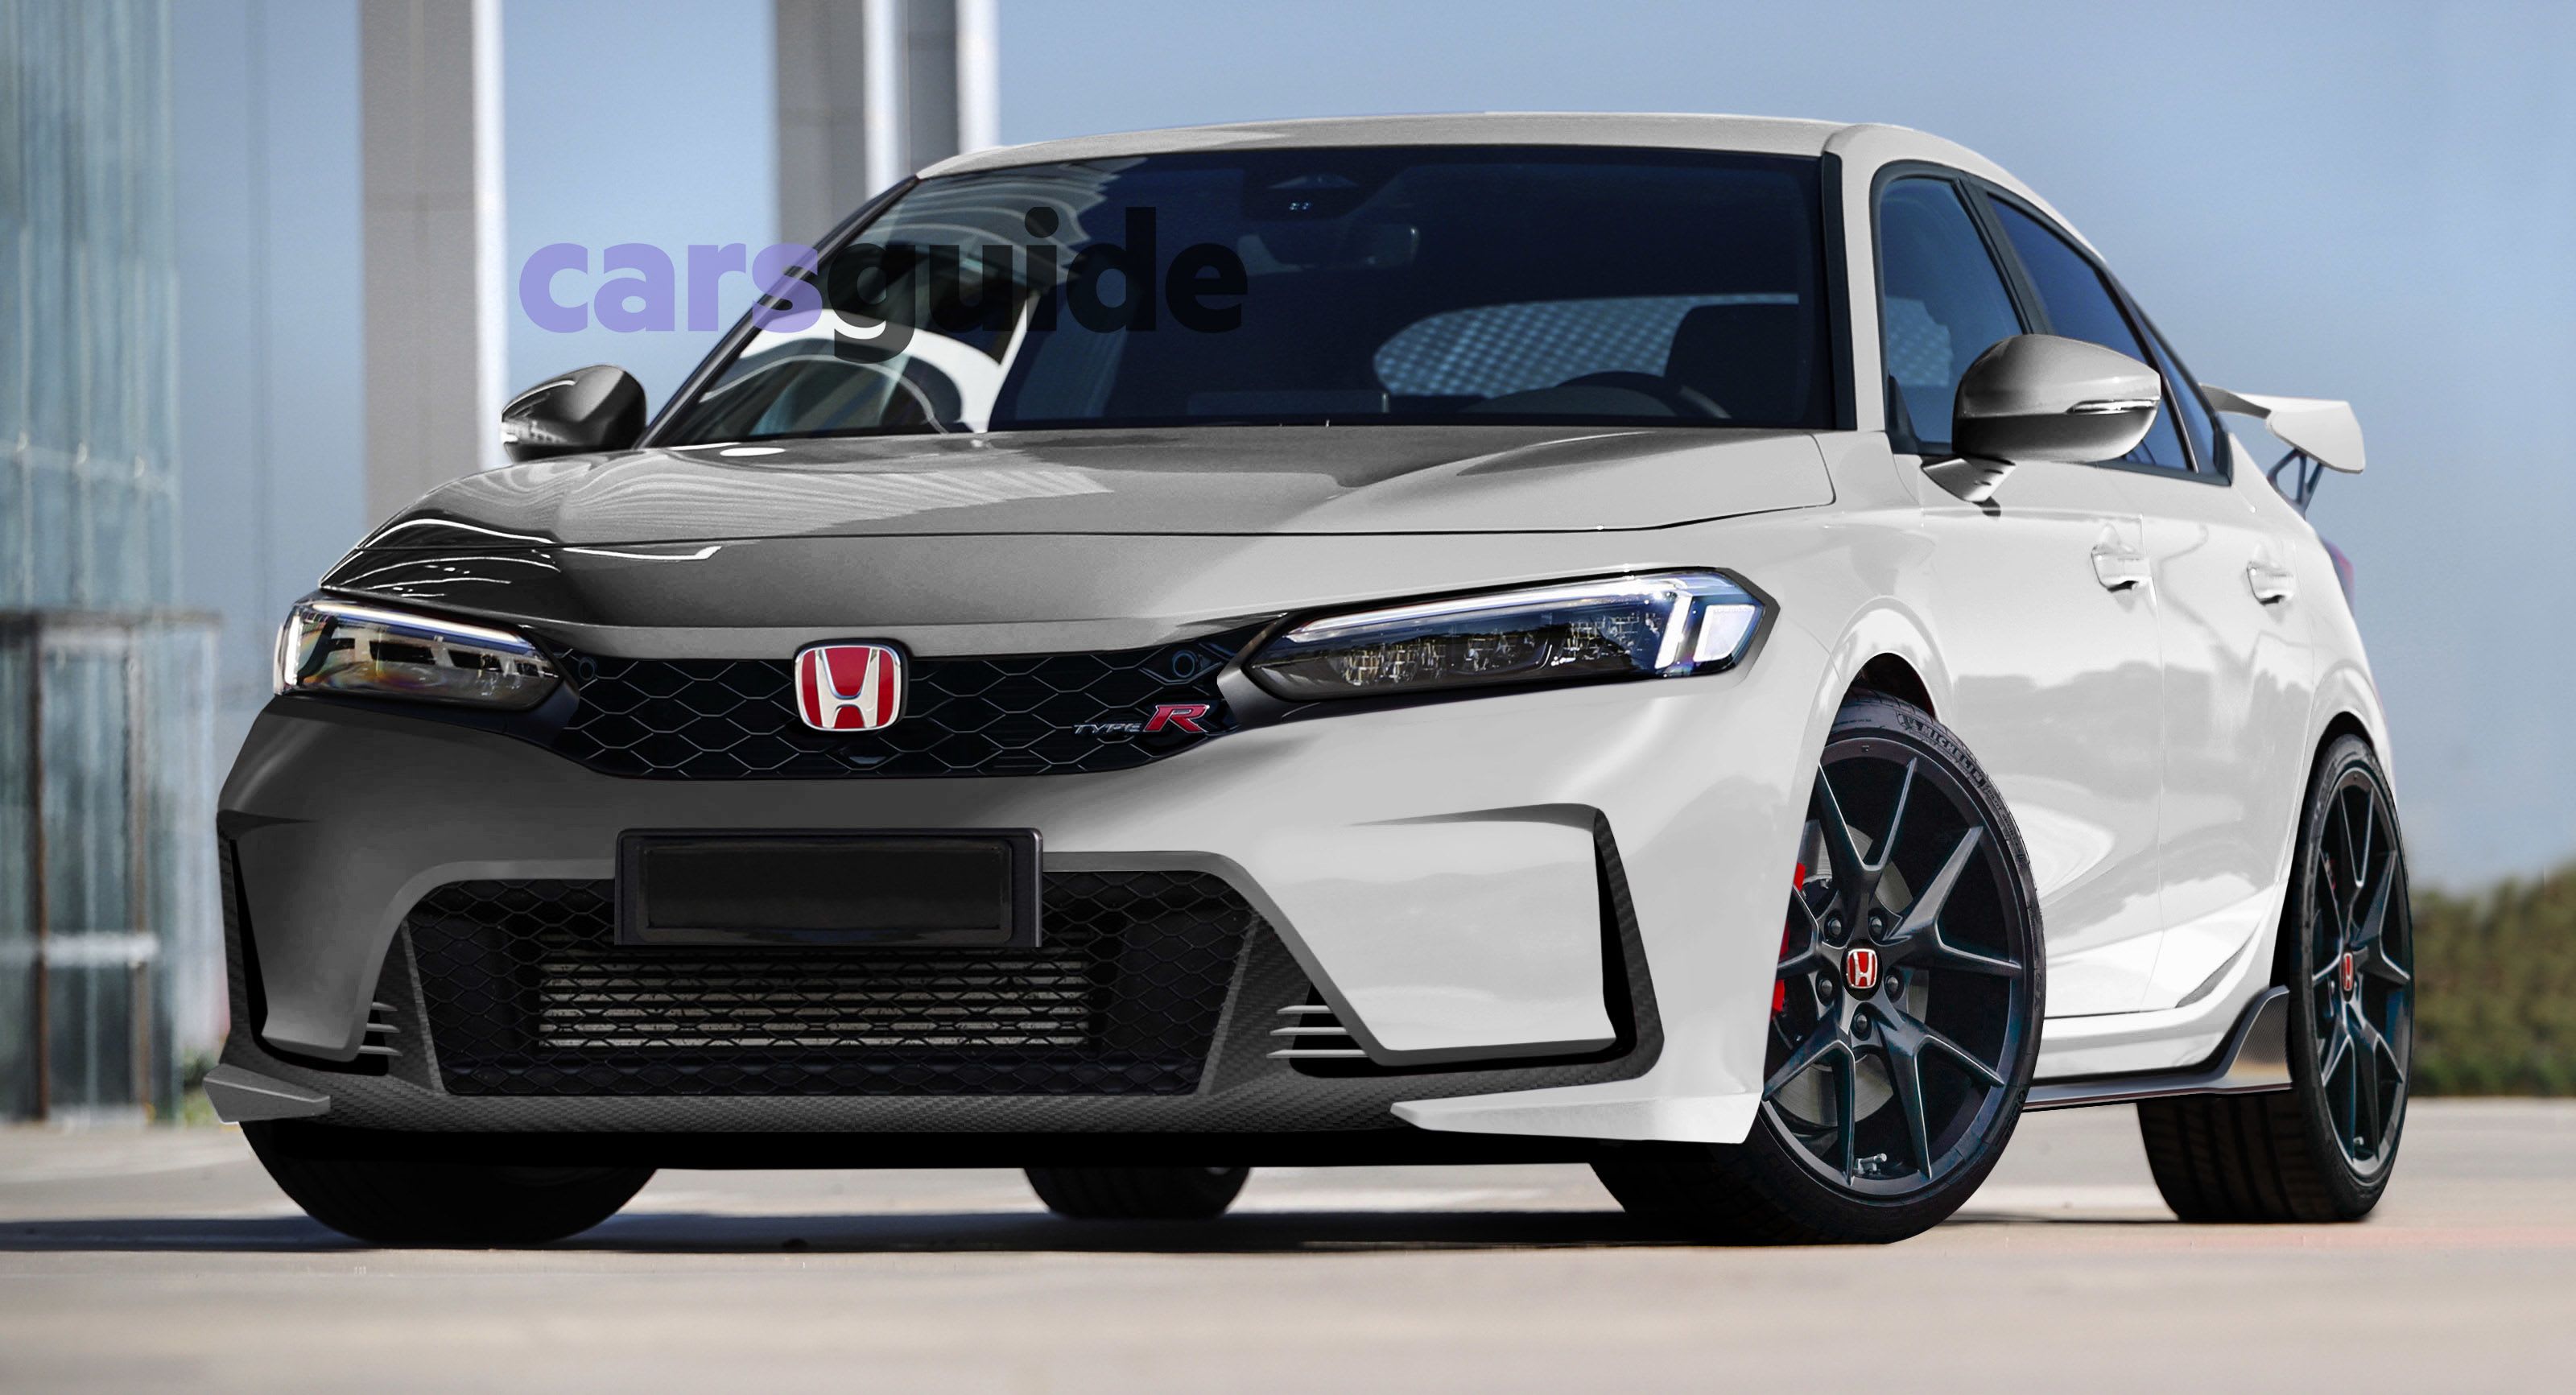 2023 Honda Civic Type R Engine, timing, potential performance numbers